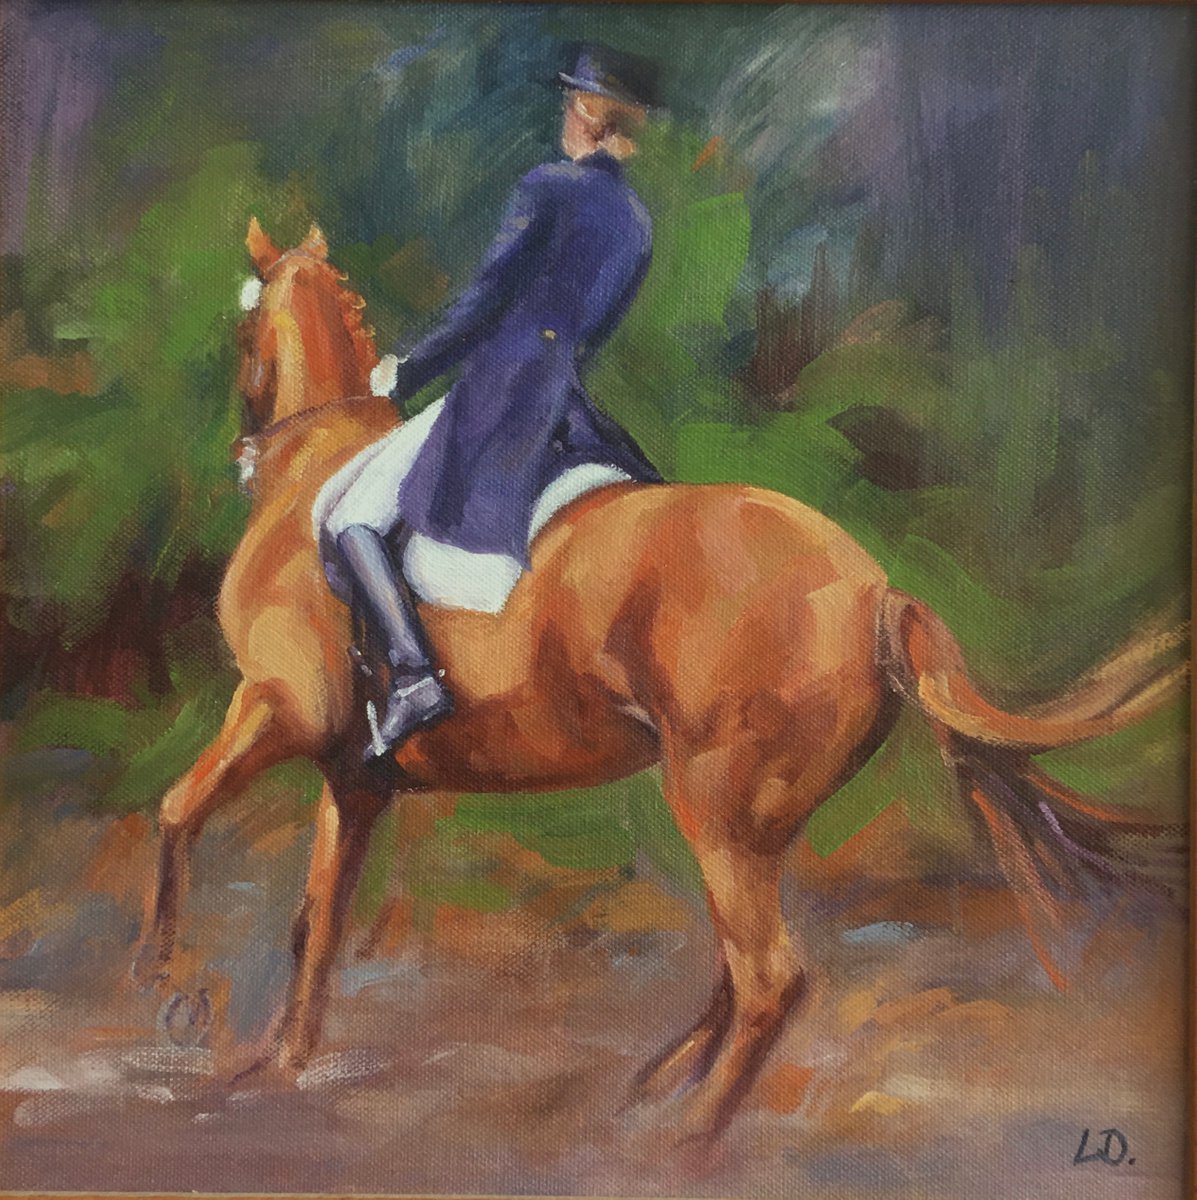 Canter Piroutte - Dressage Horse by Lorna Lancaster ASEA